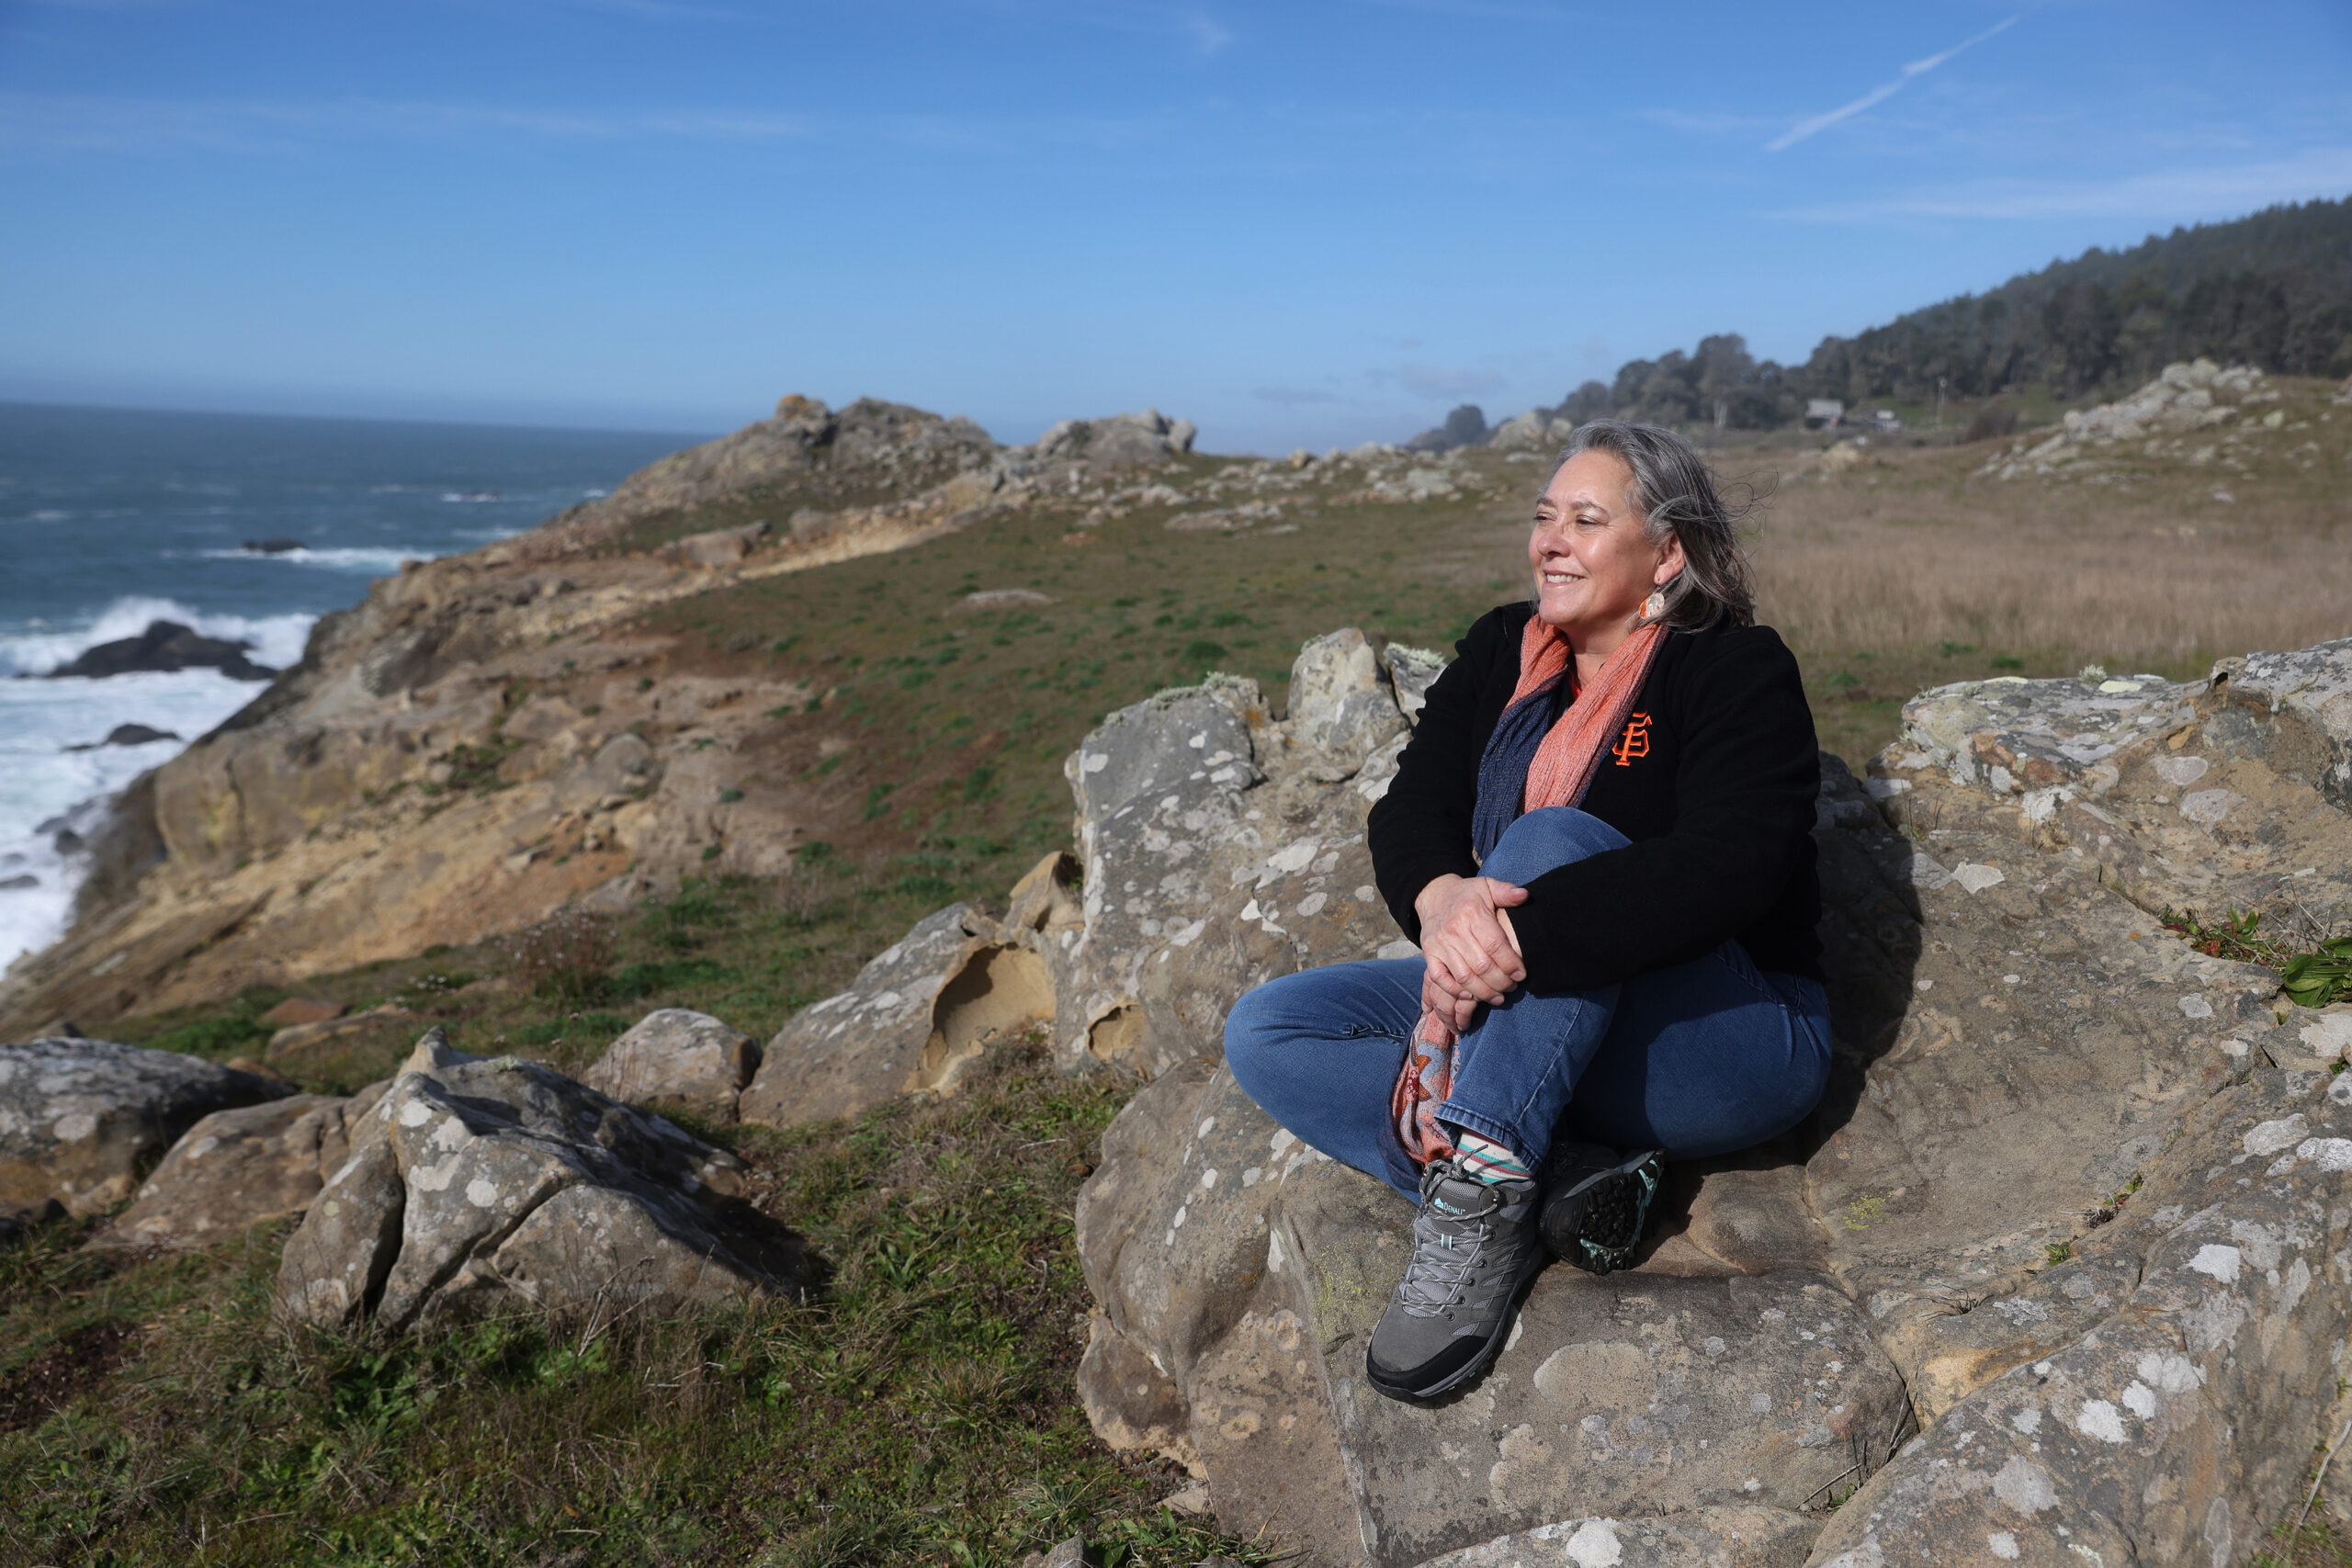 Nina Hapner's work in the Kashia Coastal Reserve conserves land for traditional fishing and foraging practices. (Christopher Chung/The Press Democrat) 